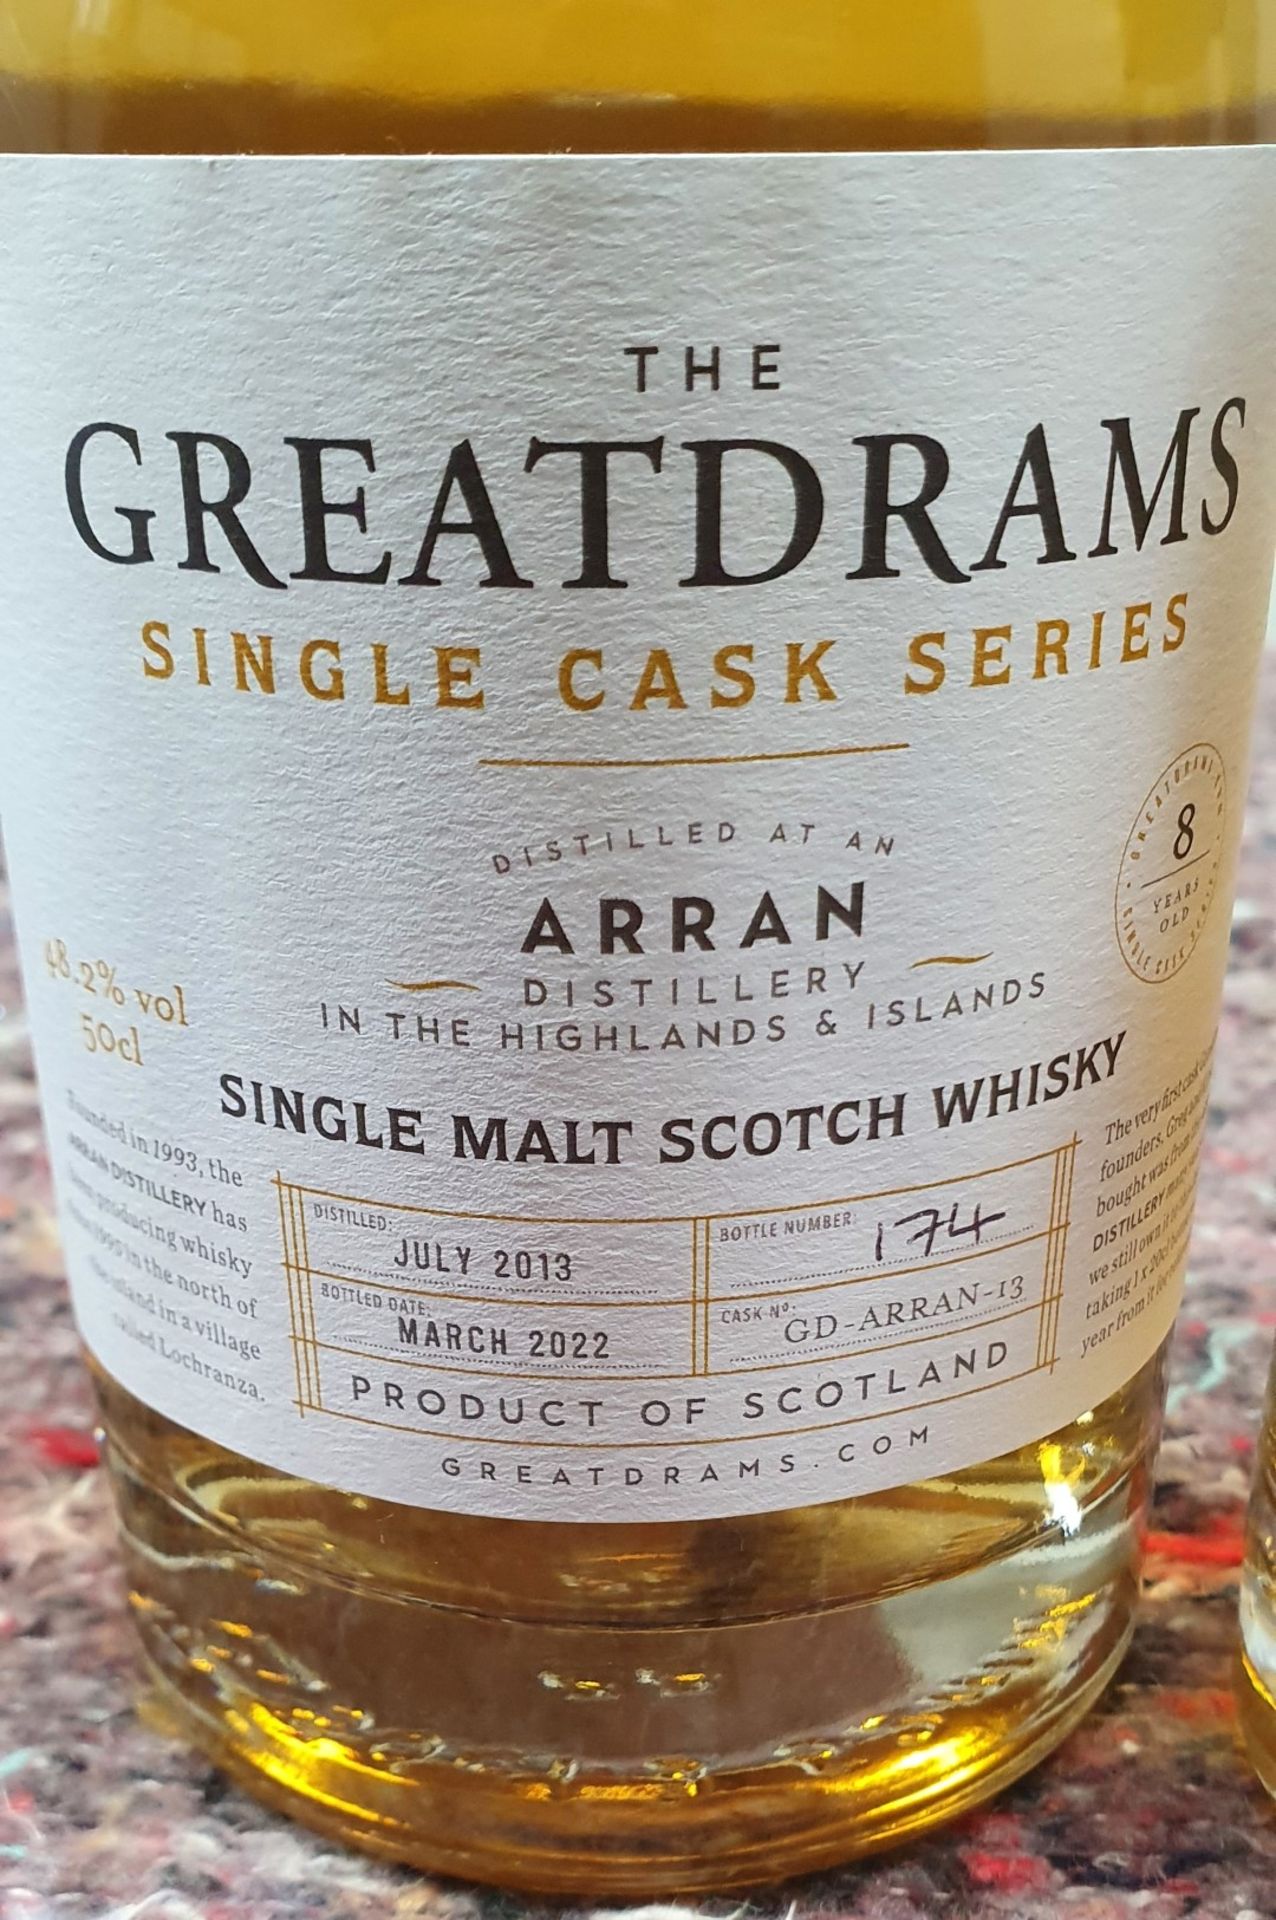 2 x Bottles of Greatdrams Single Cask Series Arran Single Malt Scotch Whisky - Includes 20cl and - Image 3 of 4